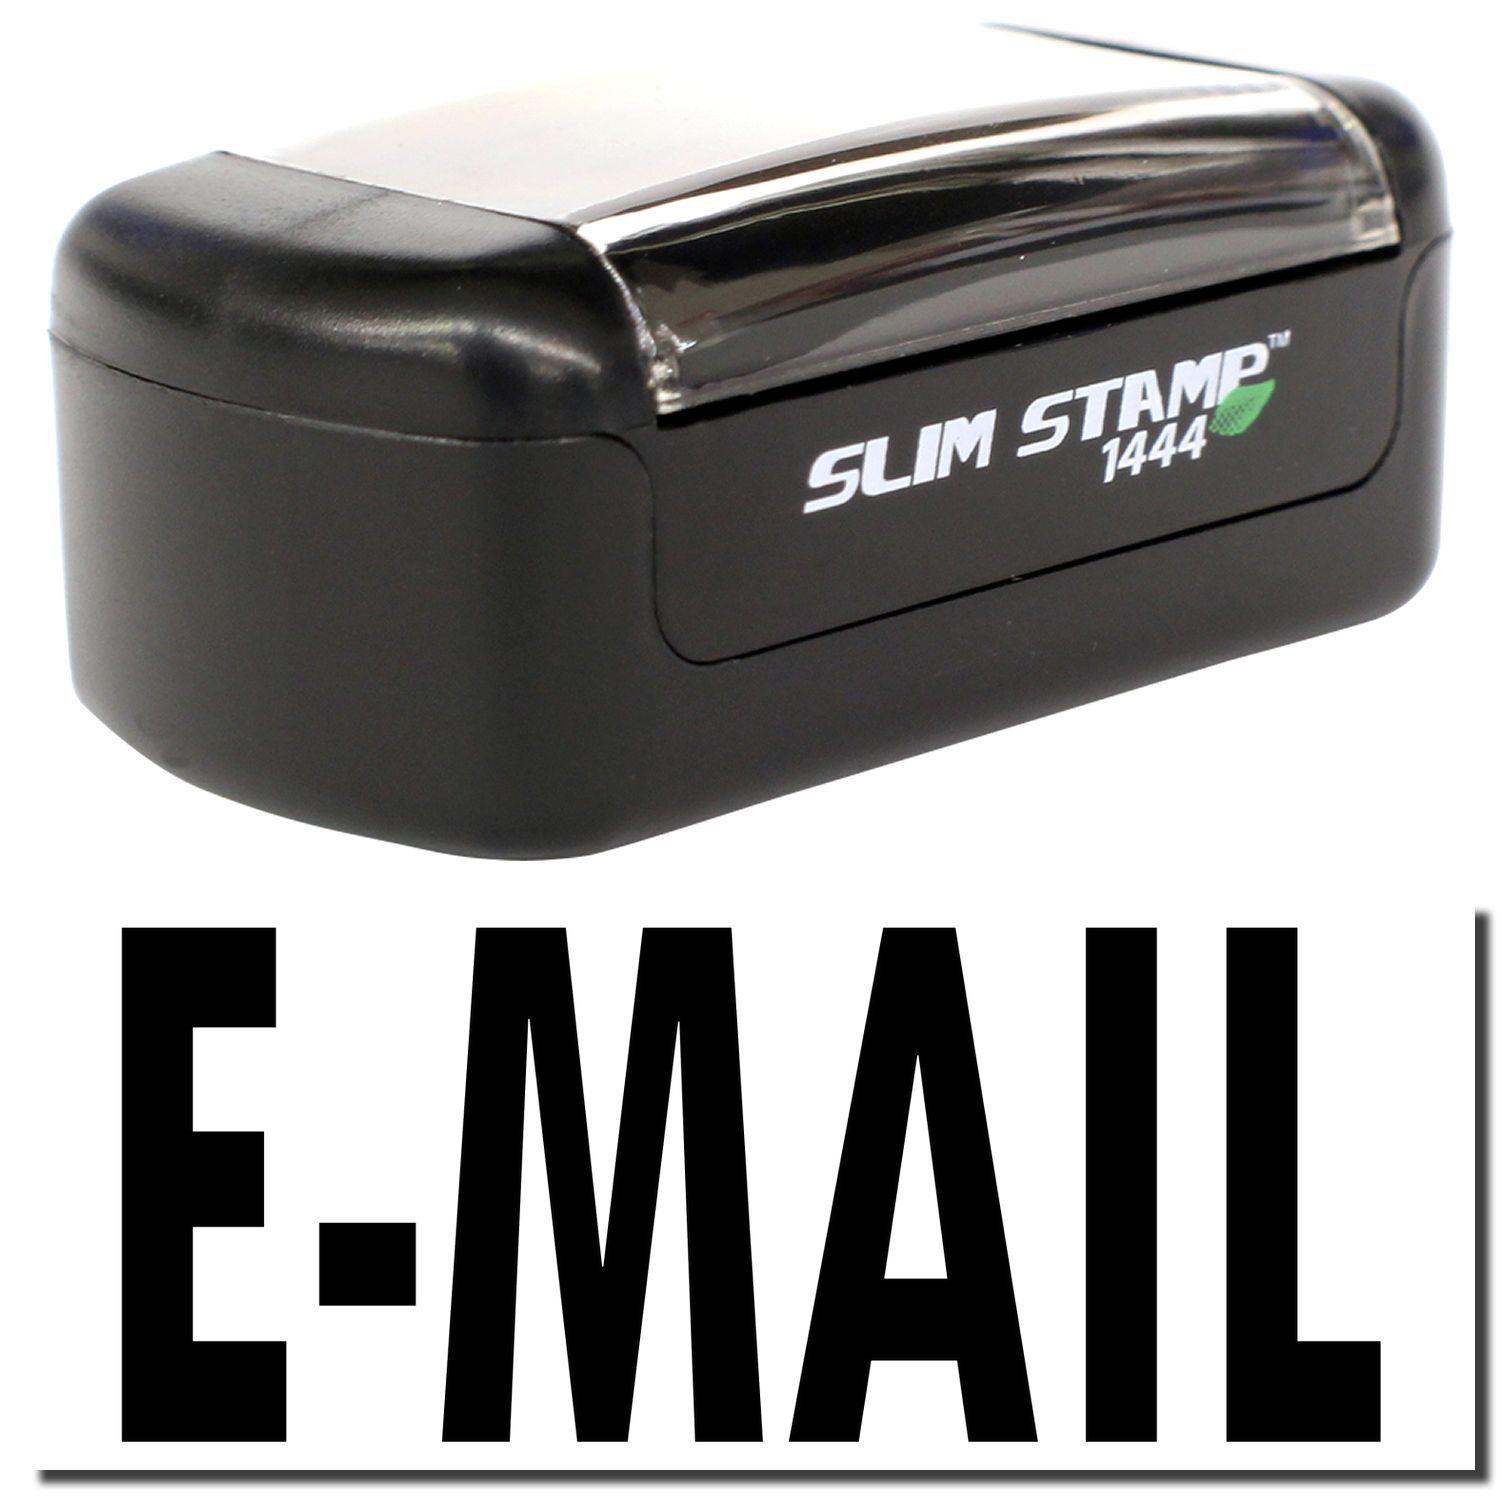 A stock office pre-inked stamp with a stamped image showing how the text "E-MAIL" is displayed after stamping.